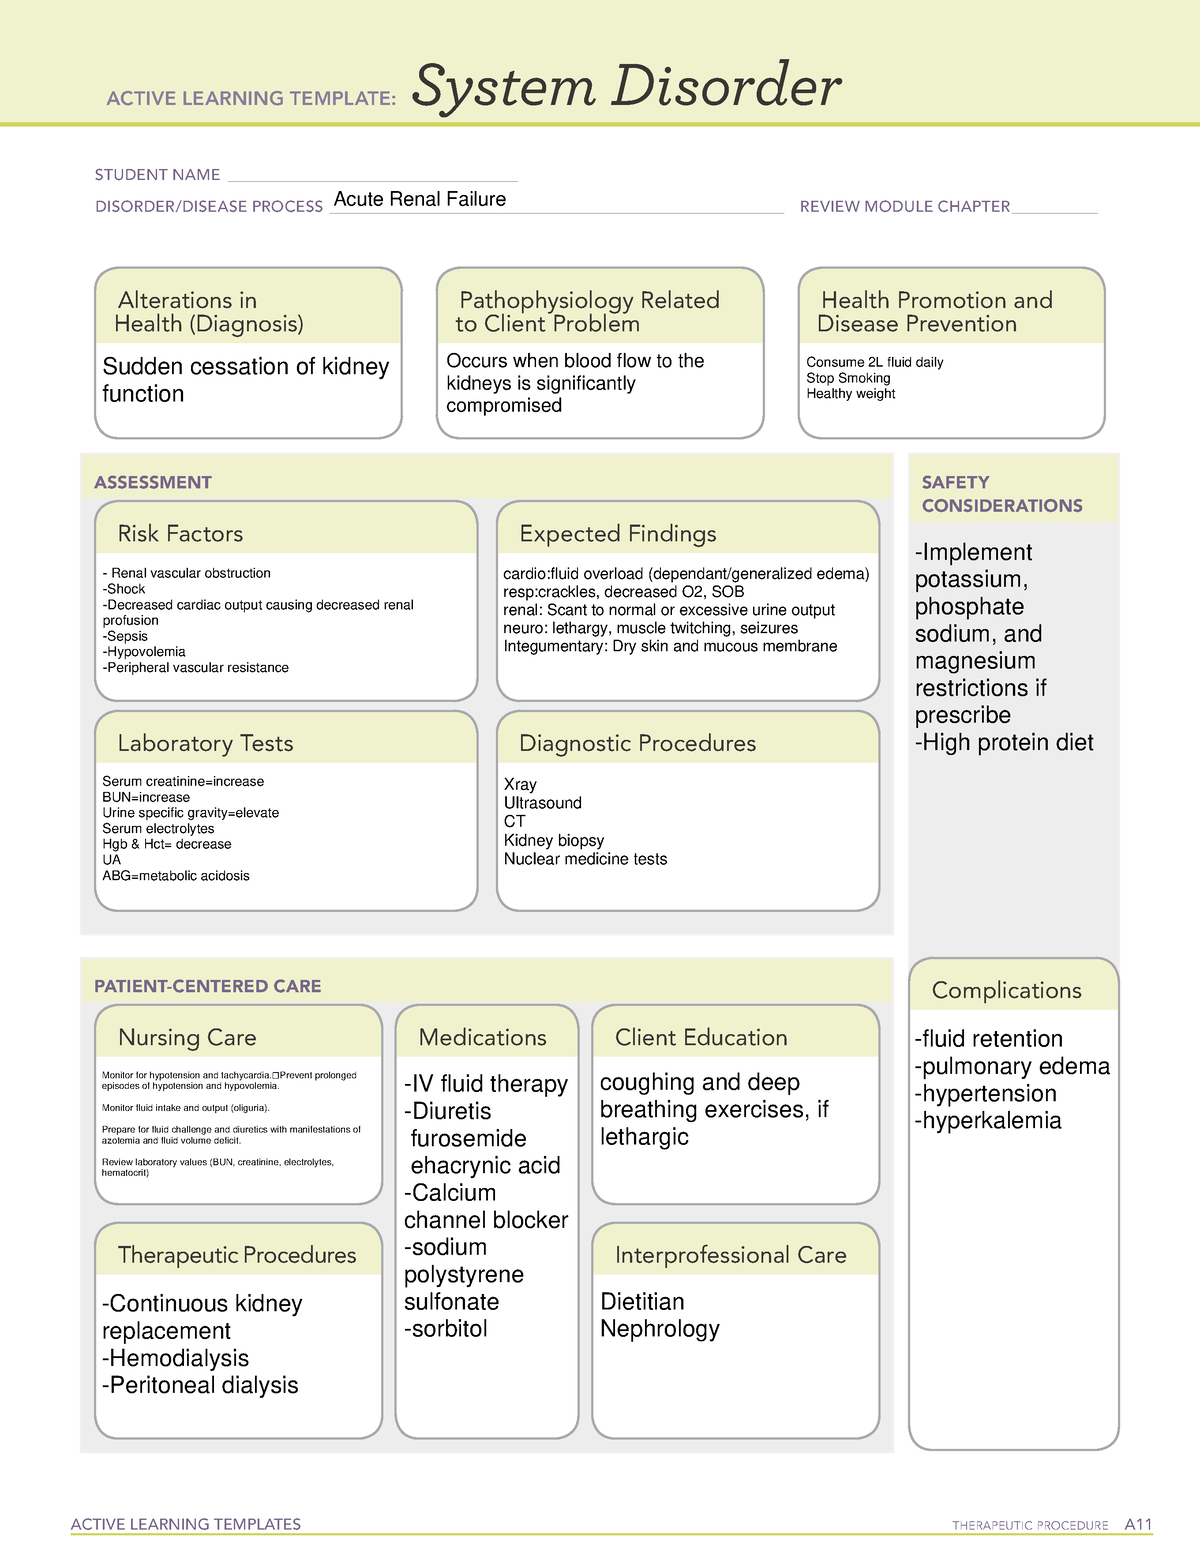 ATI medication template for med list. Med list for ATI templates for ...